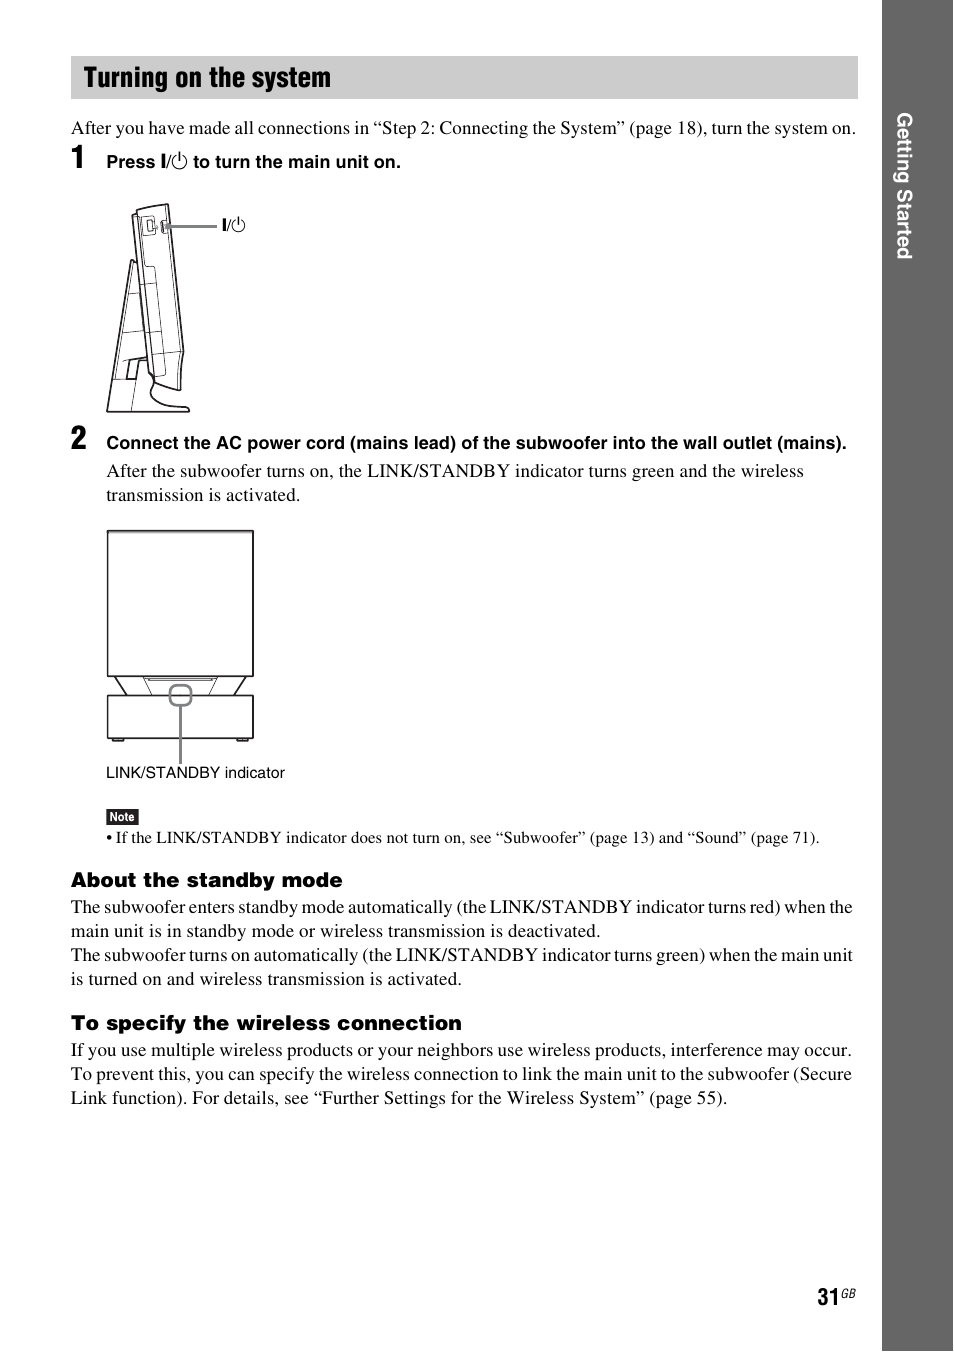 Turning on the system | Sony BDV-L800 User Manual | Page 31 / 84